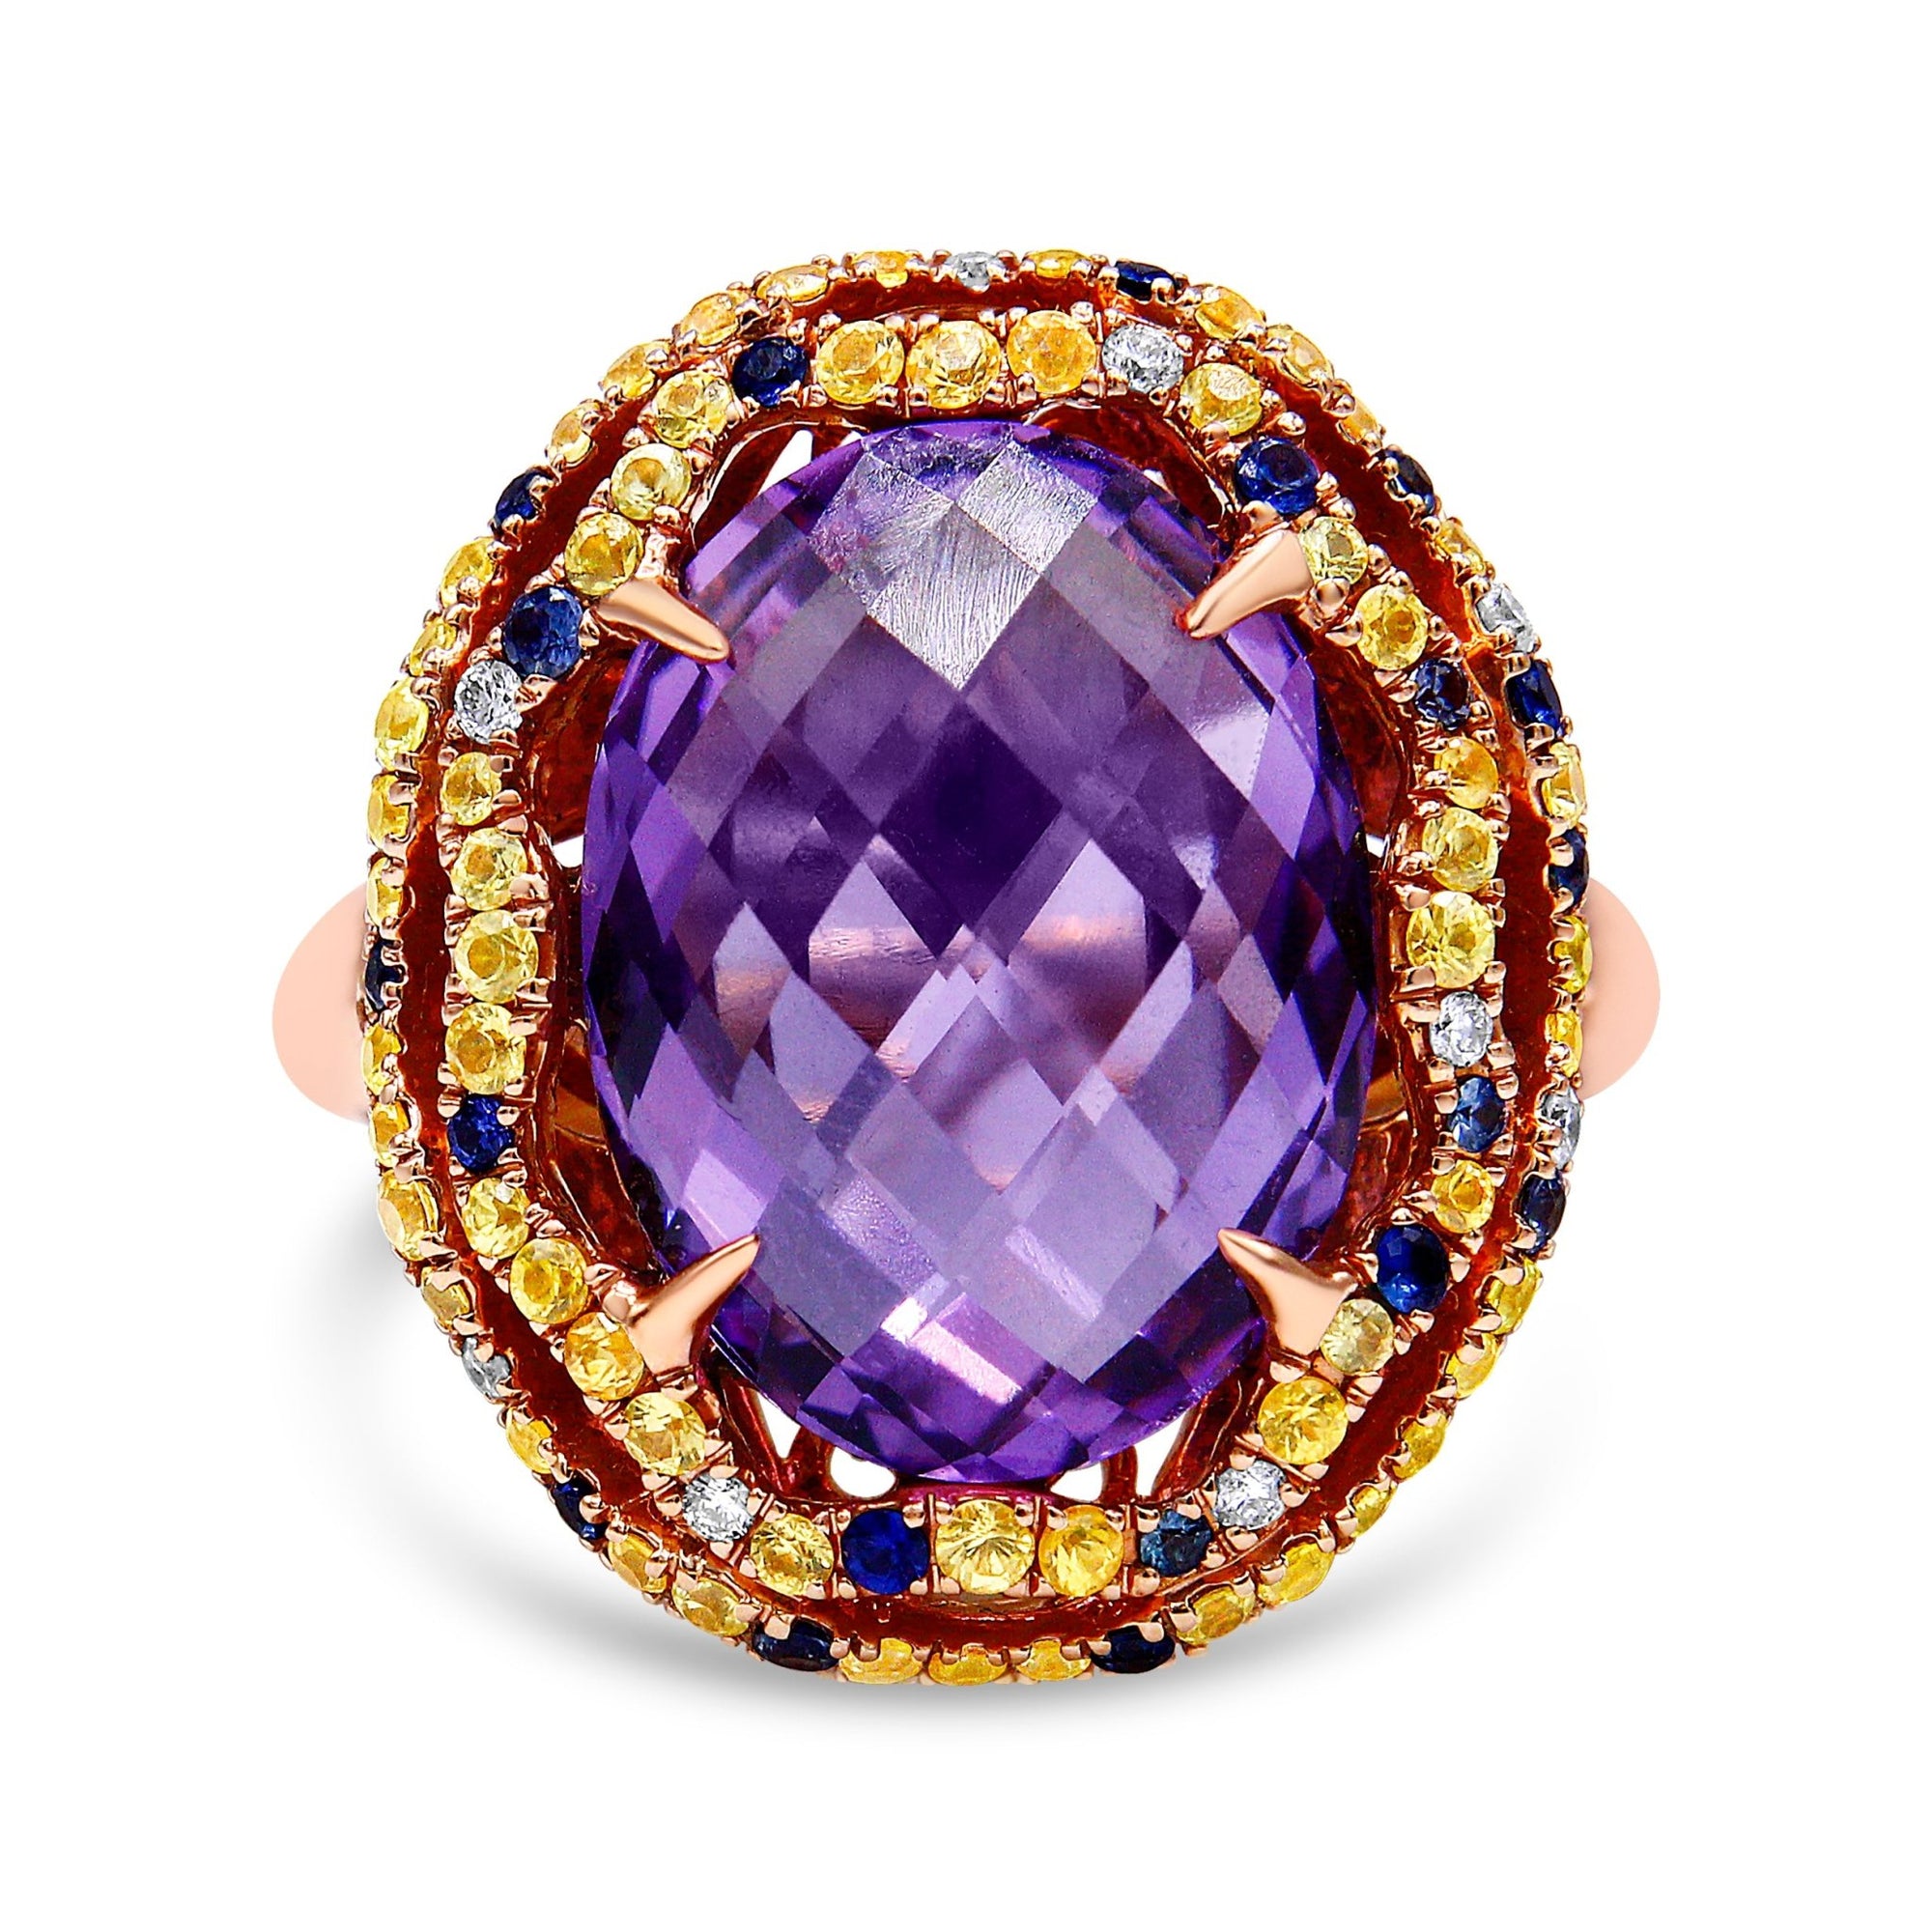 18K Yellow and Rose Gold Claw Prong Set Checkerboard Cut Purple Amethyst, Blue & Yellow Sapphire, Diamond Accent Cocktail Ring Band (F-G Color, VS1-VS2 Clarity) - Ring Size 7 - LinkagejewelrydesignLinkagejewelrydesign